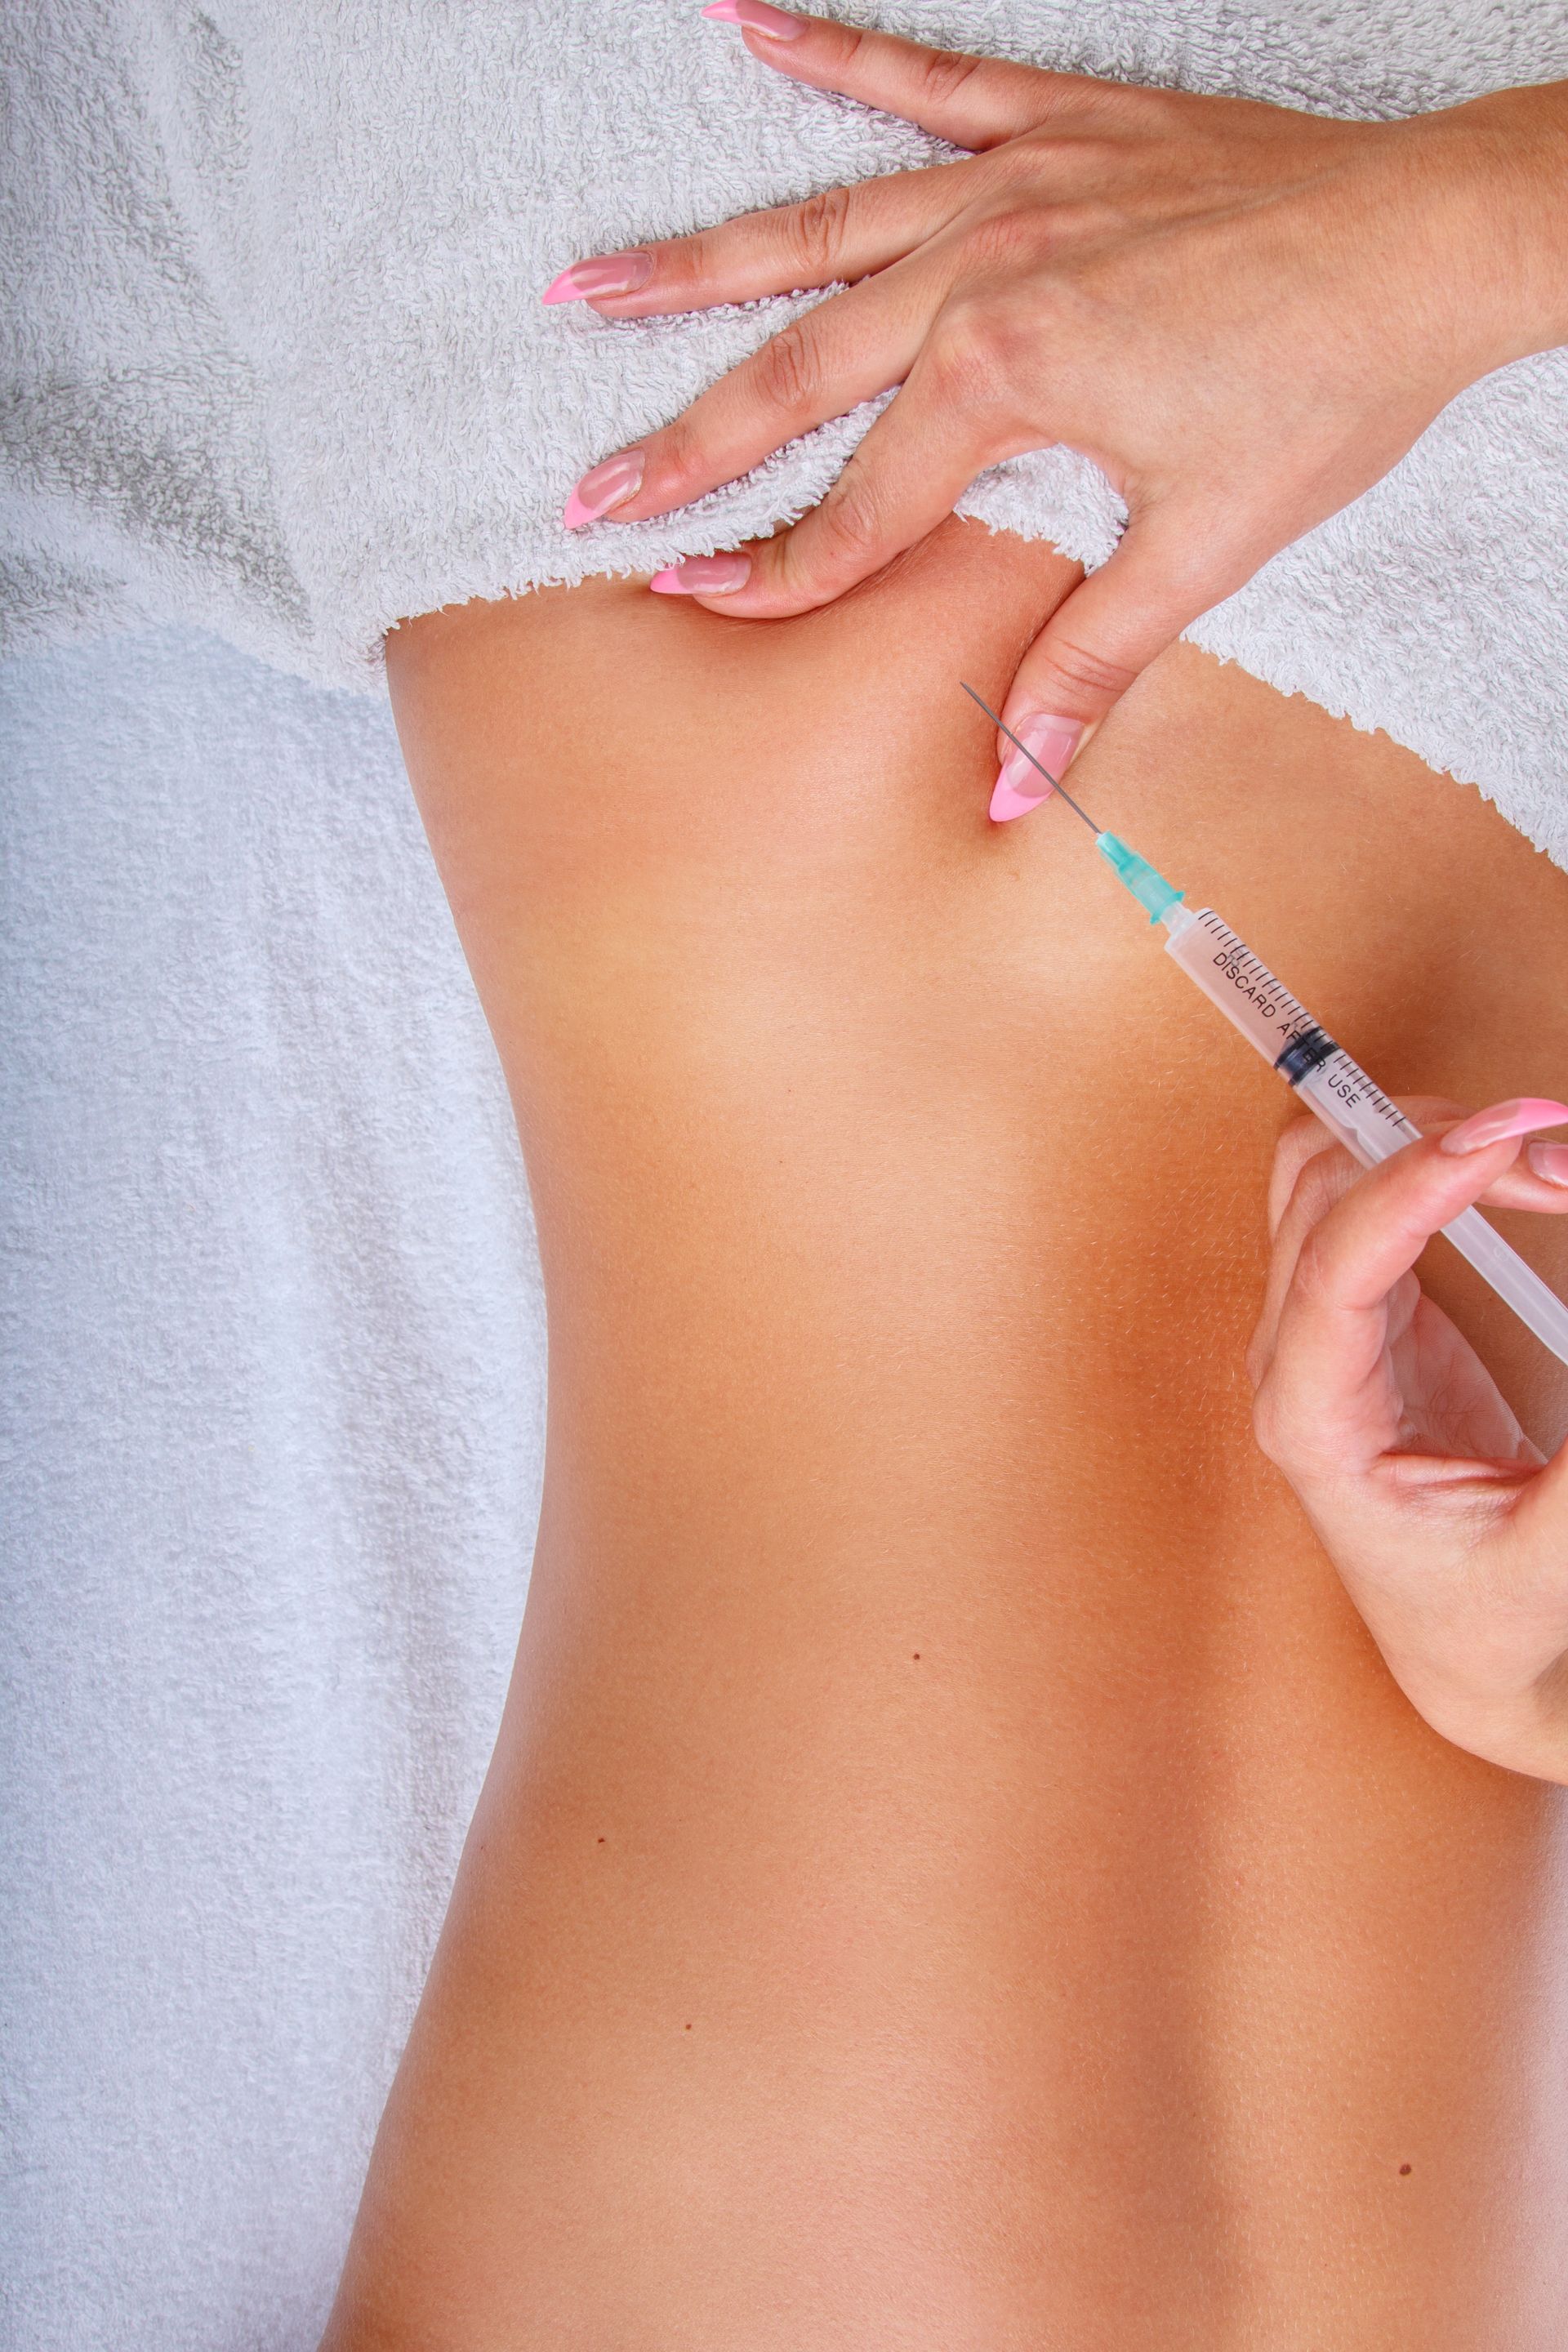 a woman is getting an injection in her back with a syringe